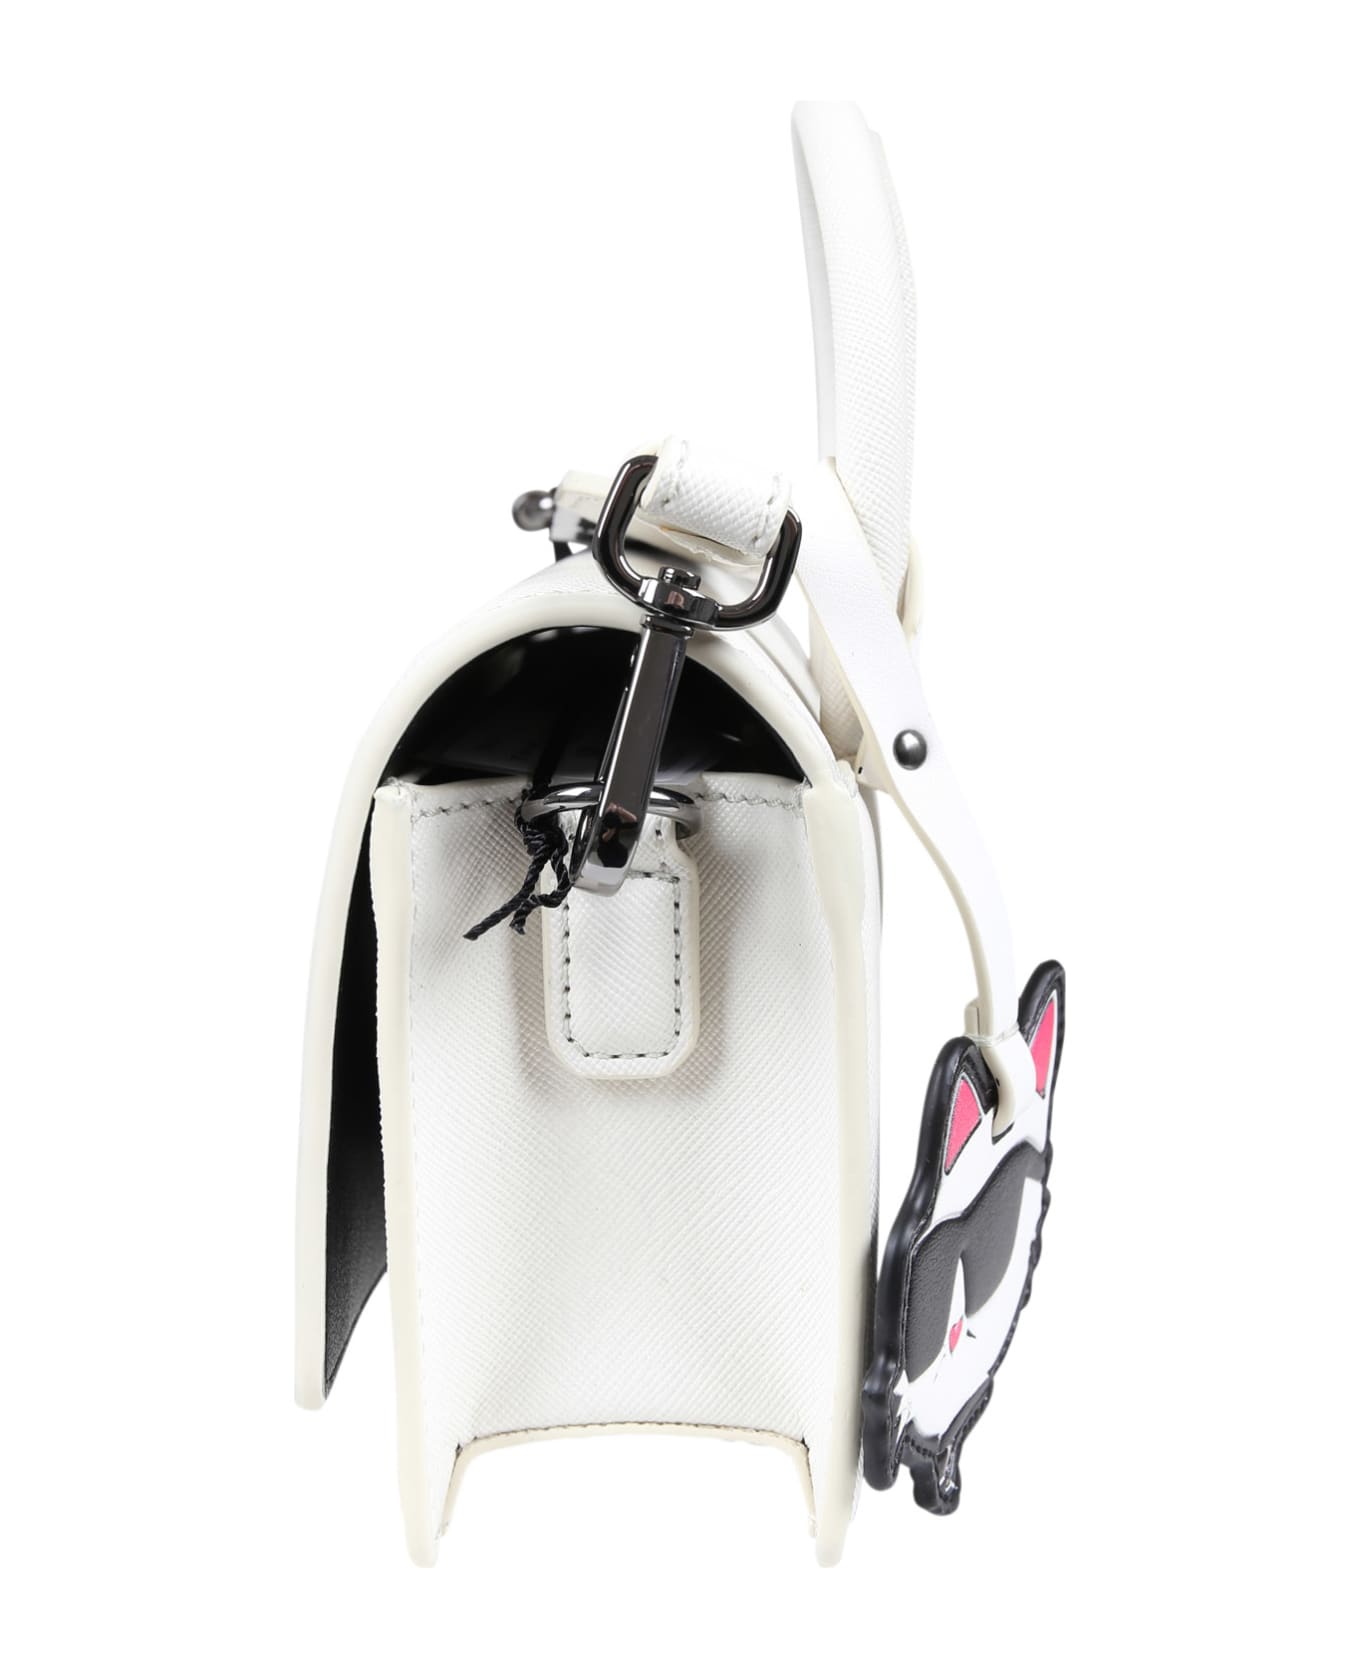 Karl Lagerfeld Kids White Casual Bag With Logo - White アクセサリー＆ギフト